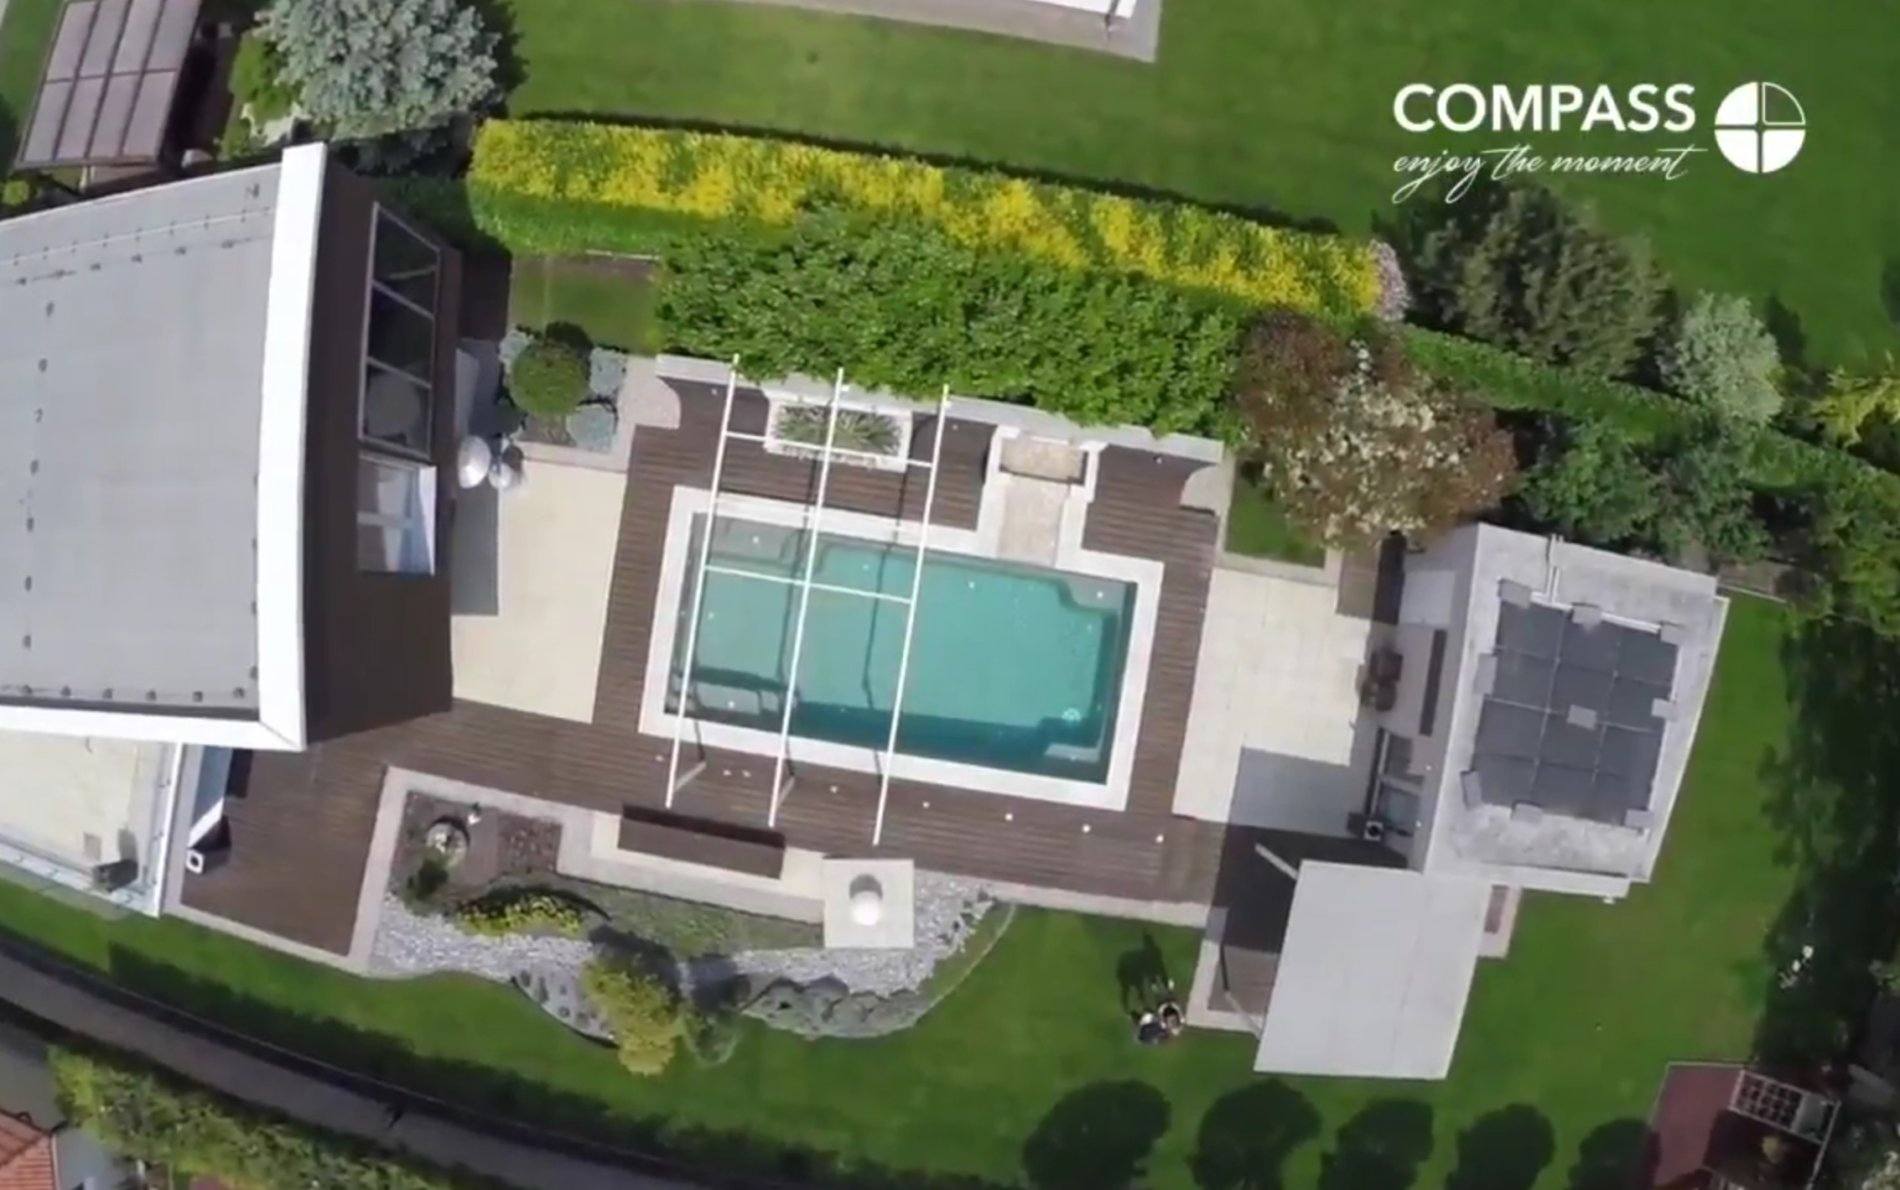 VIDEO: Drone flight above Compass ceramic pool - Compass Pools1900 x 1190